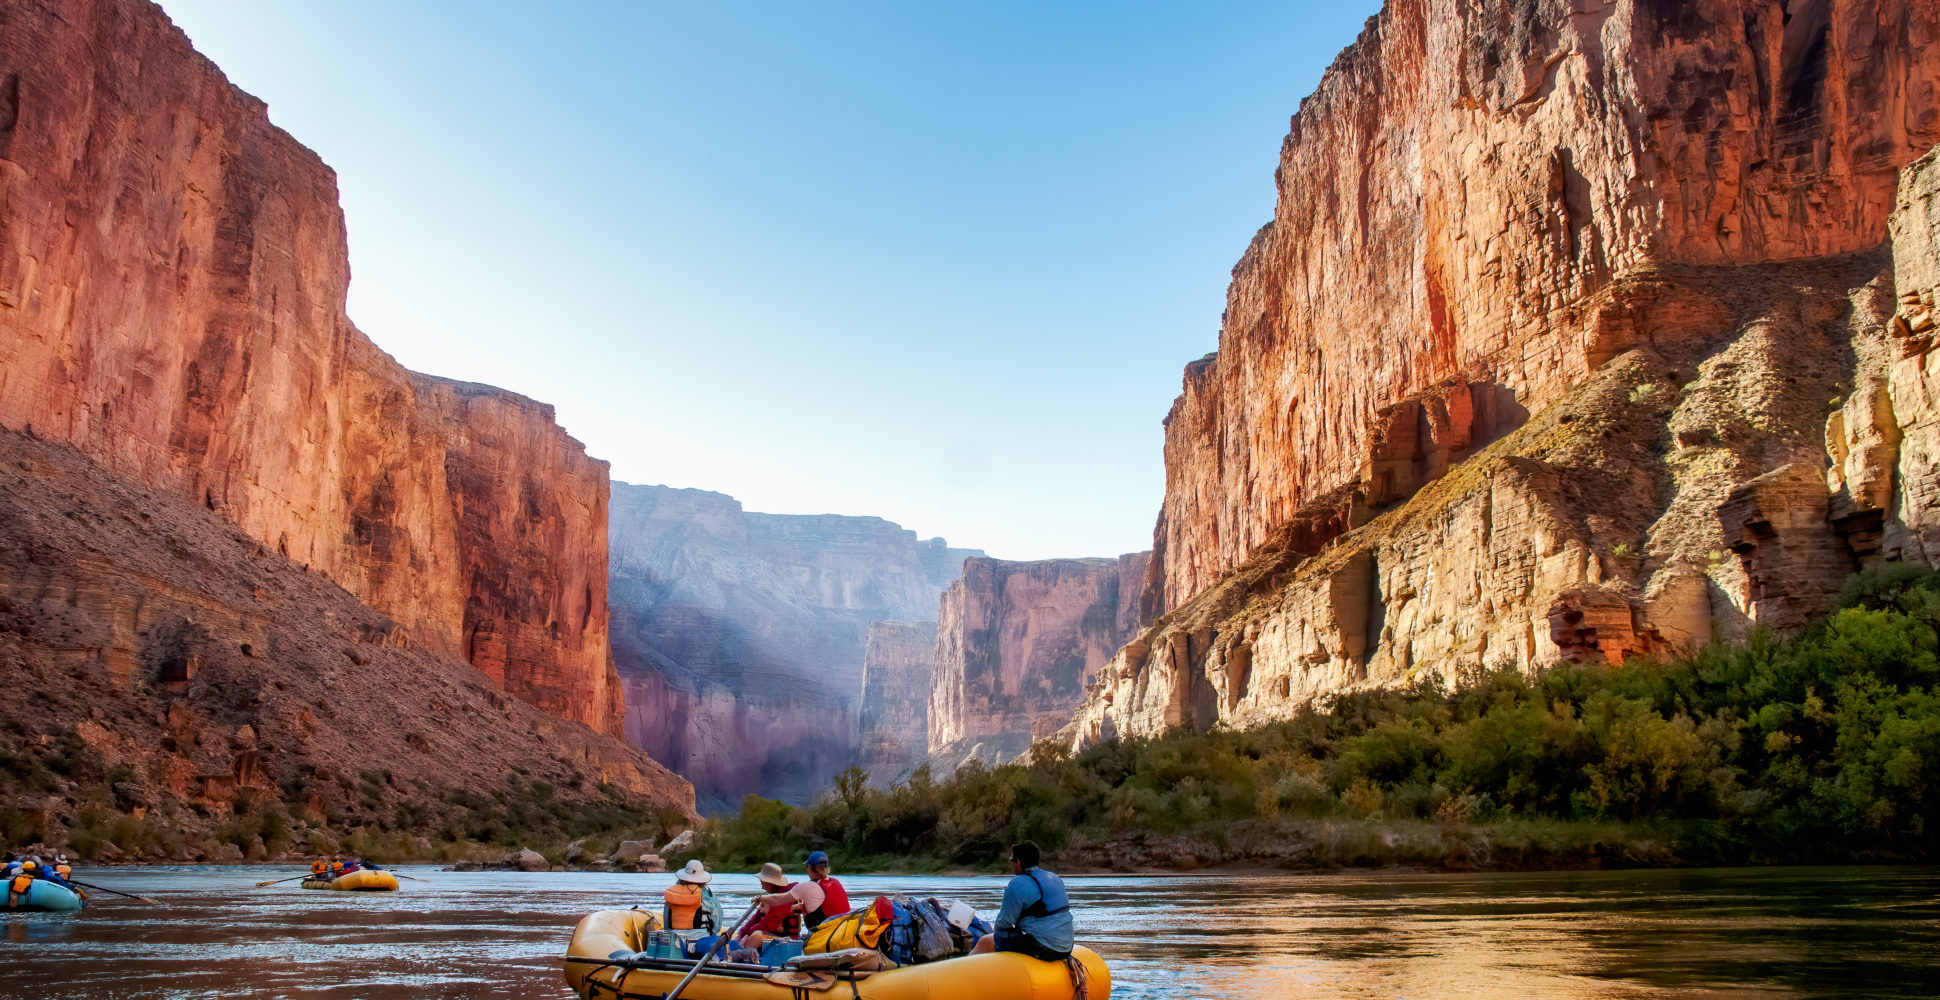 Rafting the Colorado River in Grand Canyon National Park